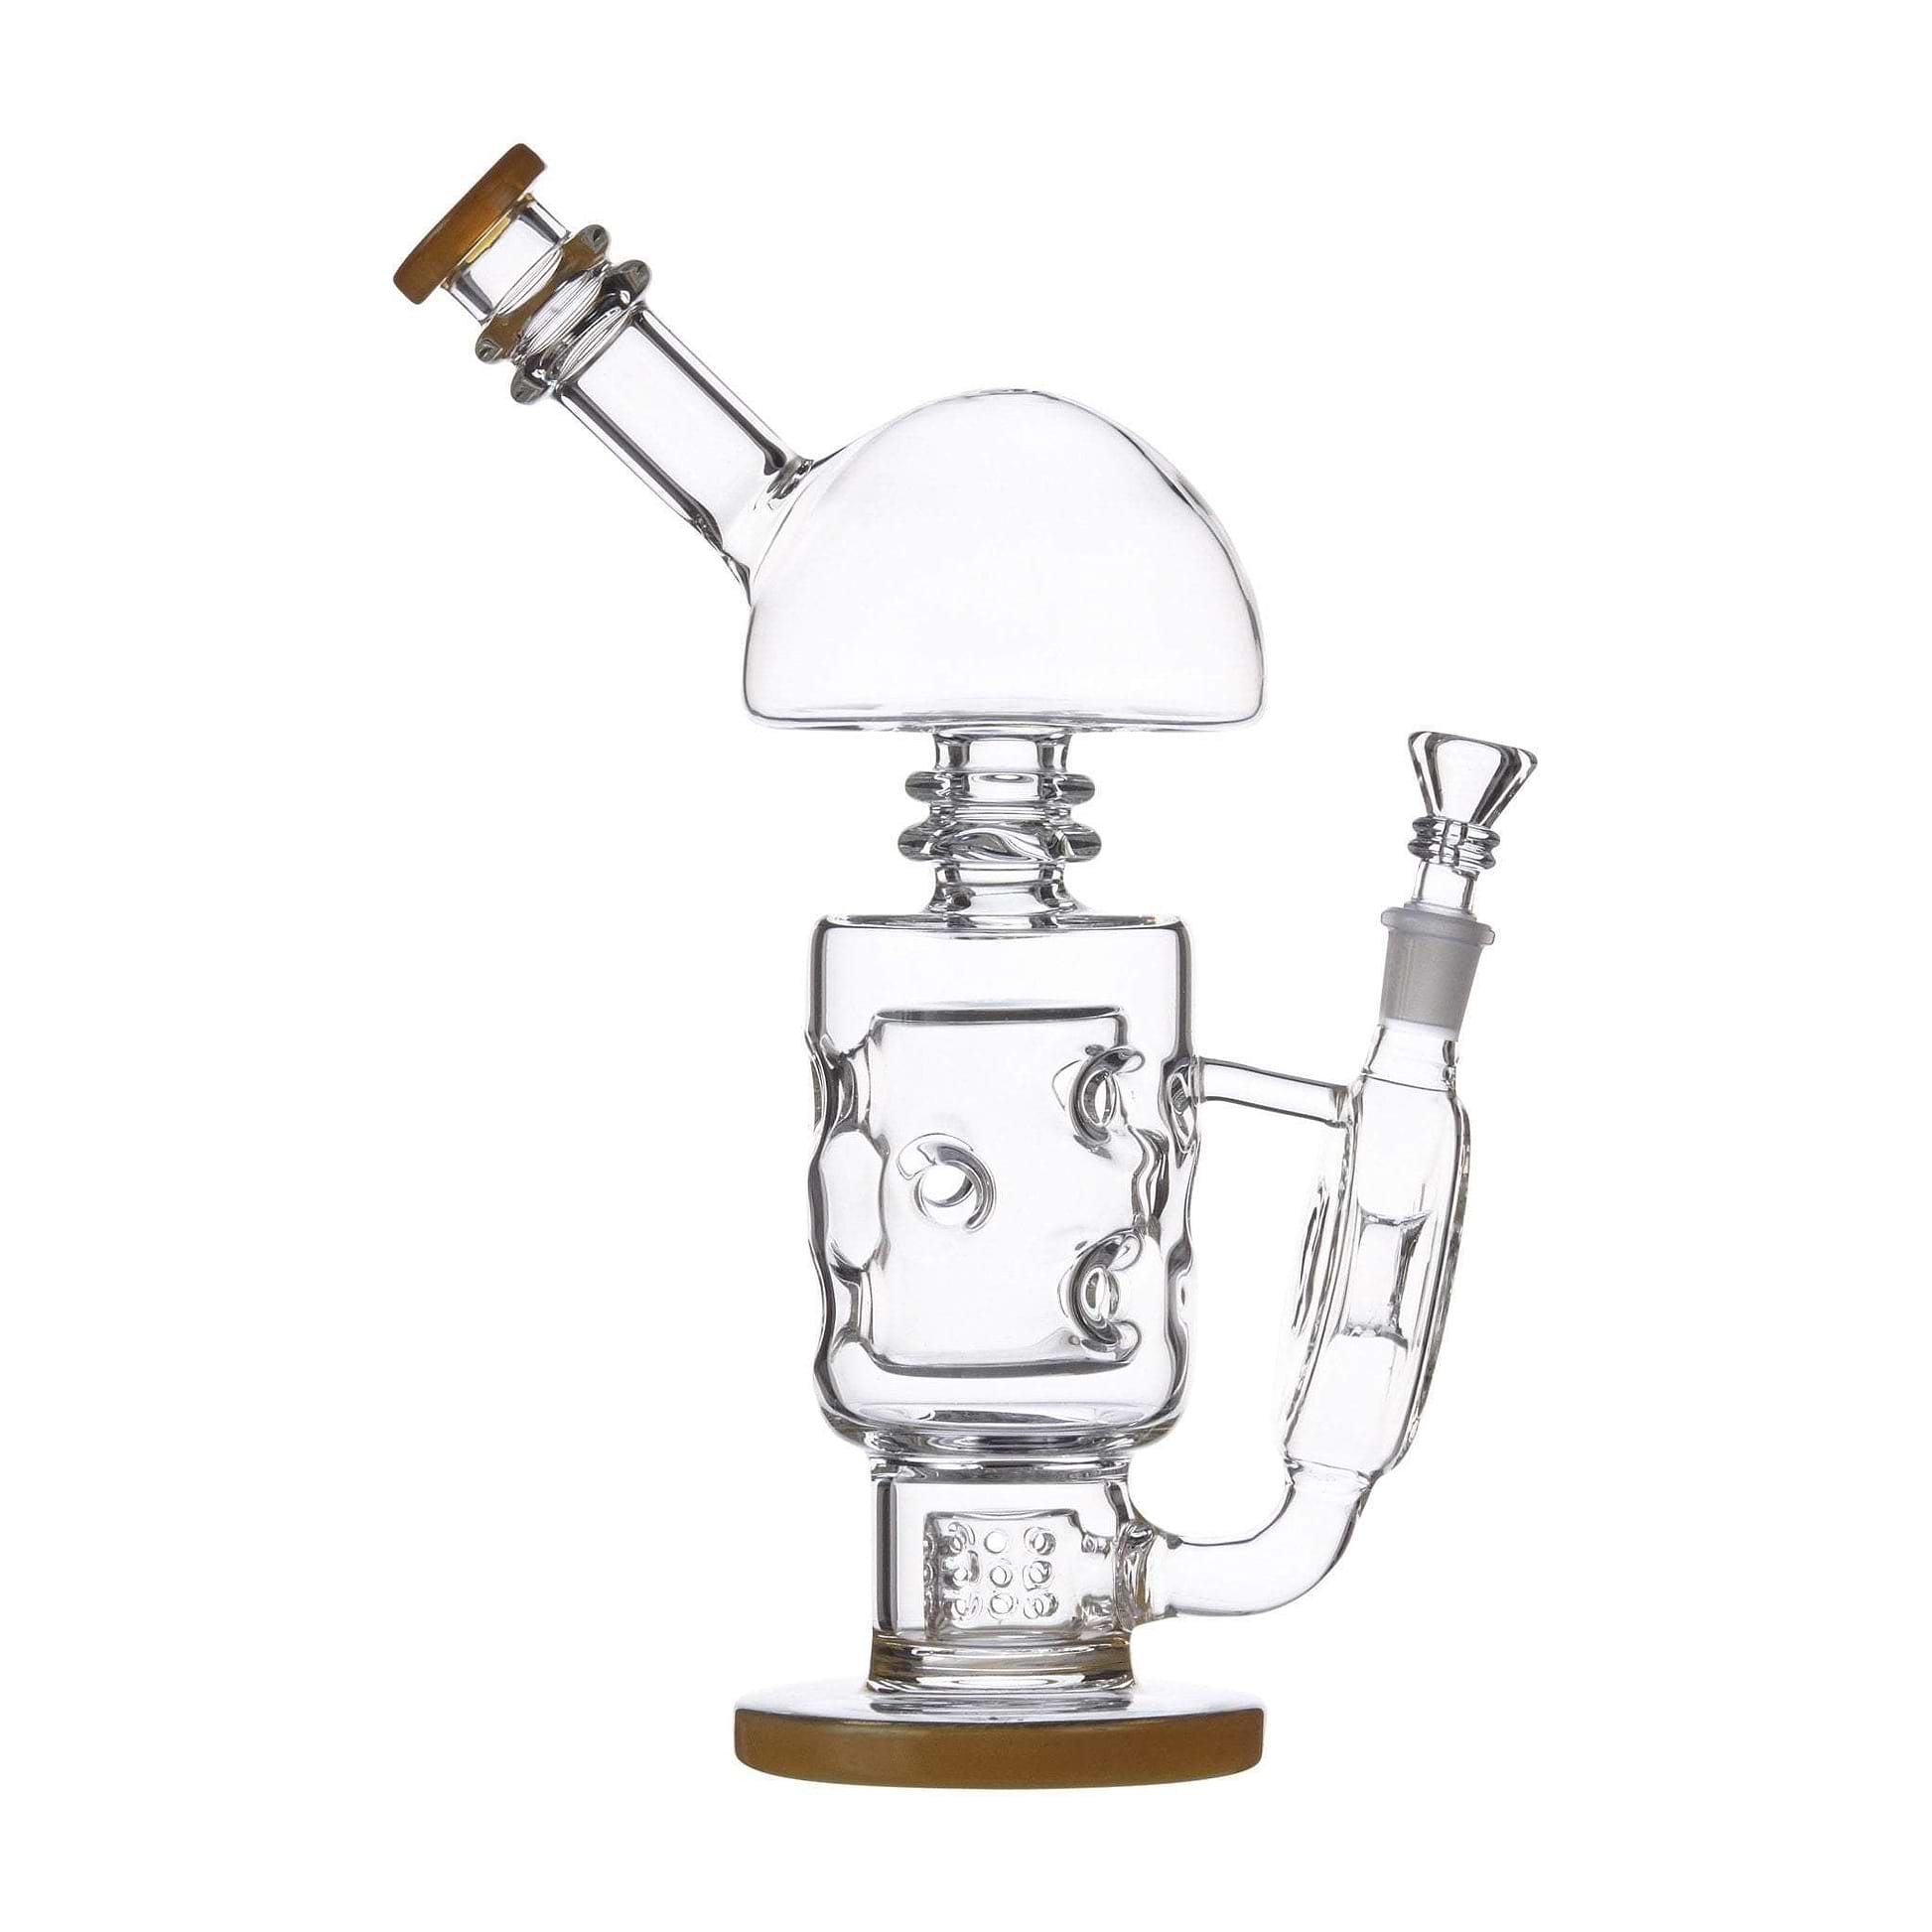 10-inch glass bong smoking device double champered robot waterflow design futuristic look